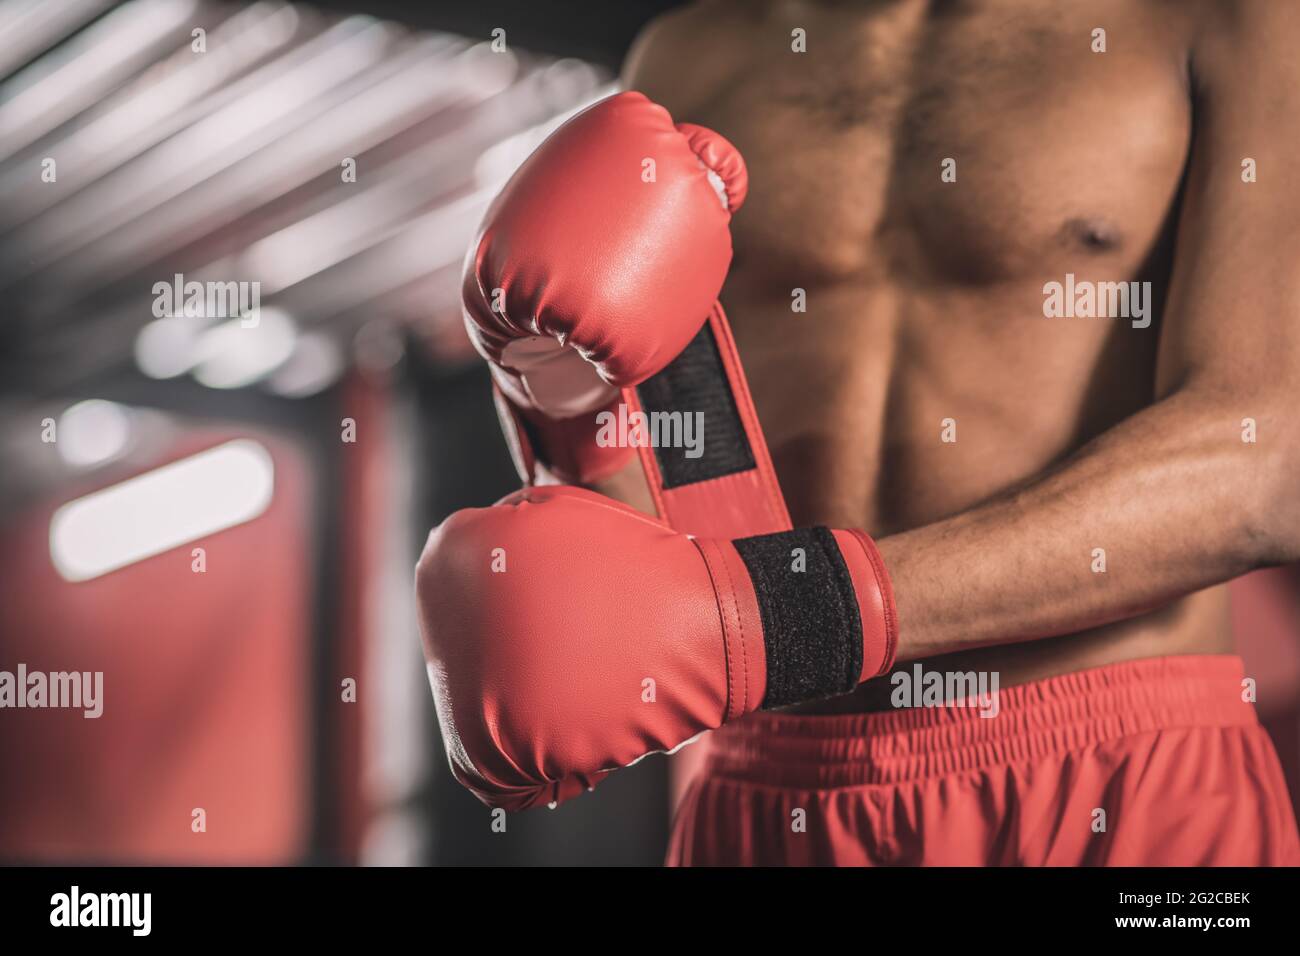 Dark-skinned kickboxer in red shorts and red boxing gloves Stock Photo